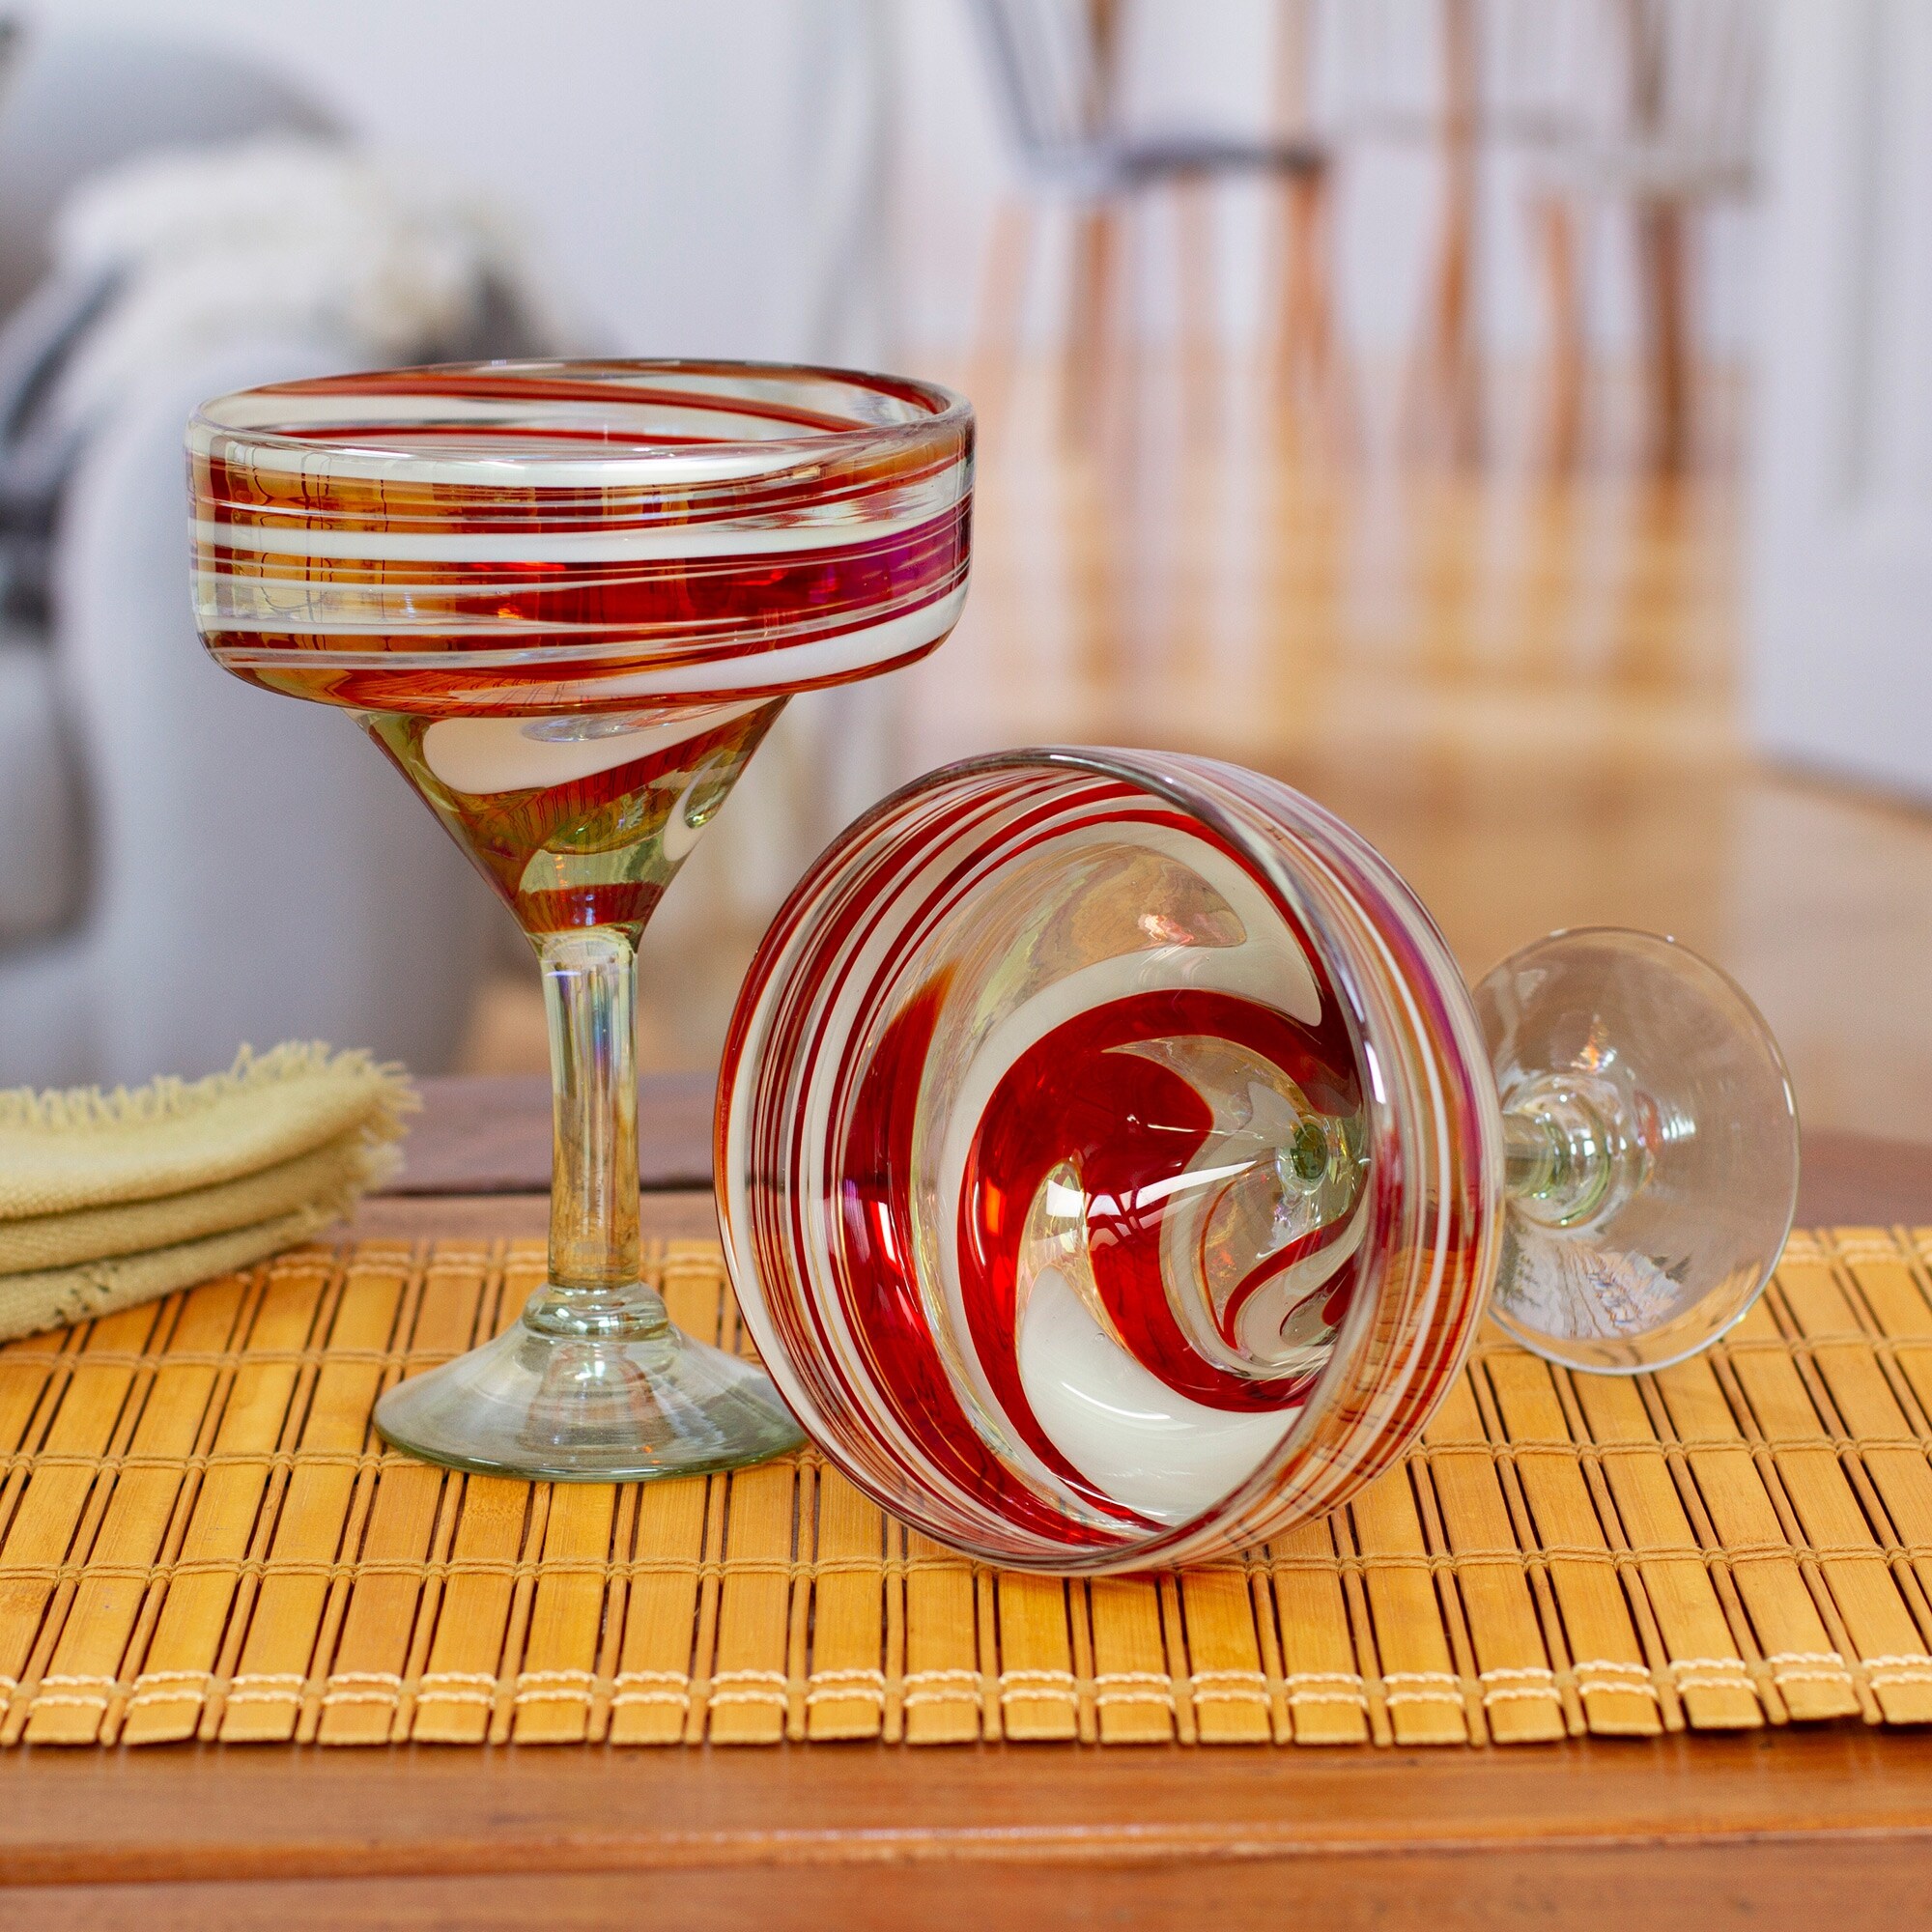 https://ak1.ostkcdn.com/images/products/is/images/direct/c16dbe78007fad1e831c1c93a3d796ec84f4c55c/Novica-Handmade-Sophisticated-Enchantment-Handblown-Margarita-Glasses-%28Pair%29.jpg